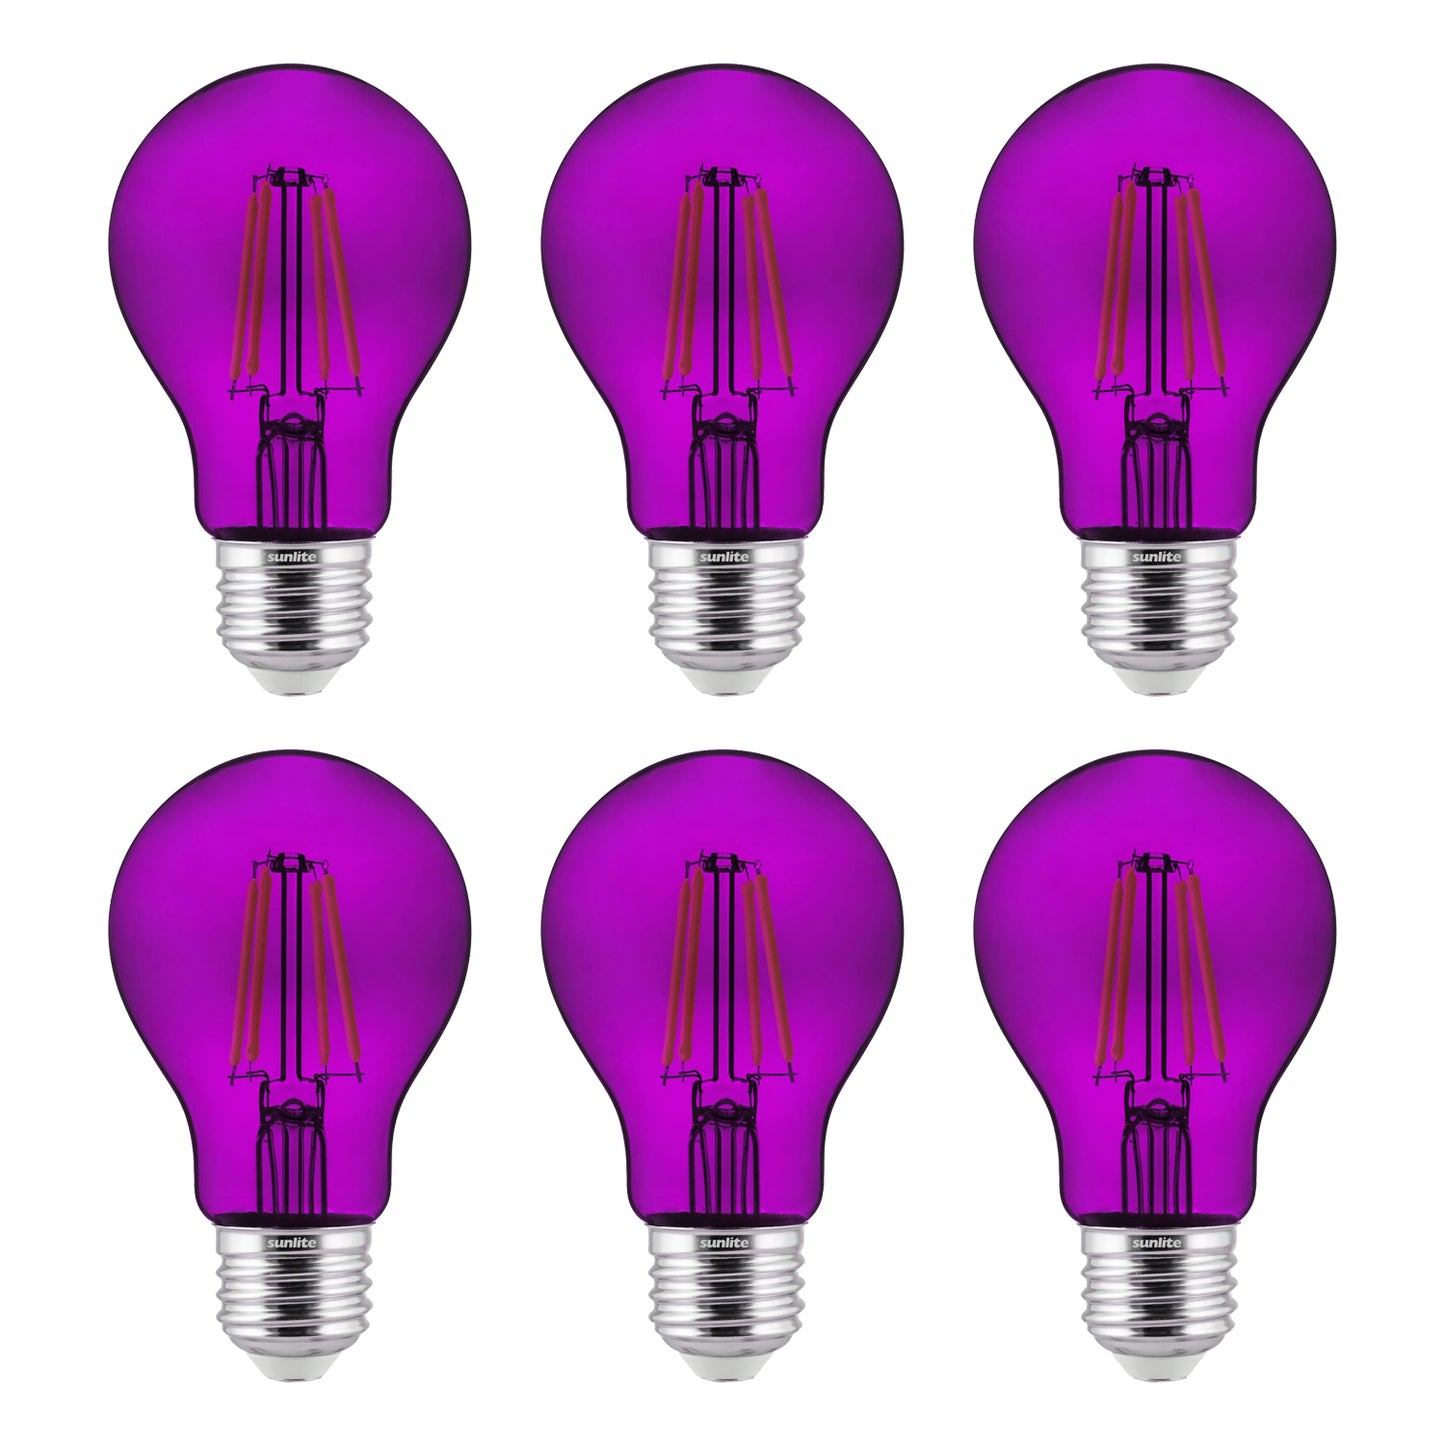 2-Pack Sunlite LED Transparent Purple A19 Filament Bulbs, 4.5 Watts, Dimmable, UL Listed